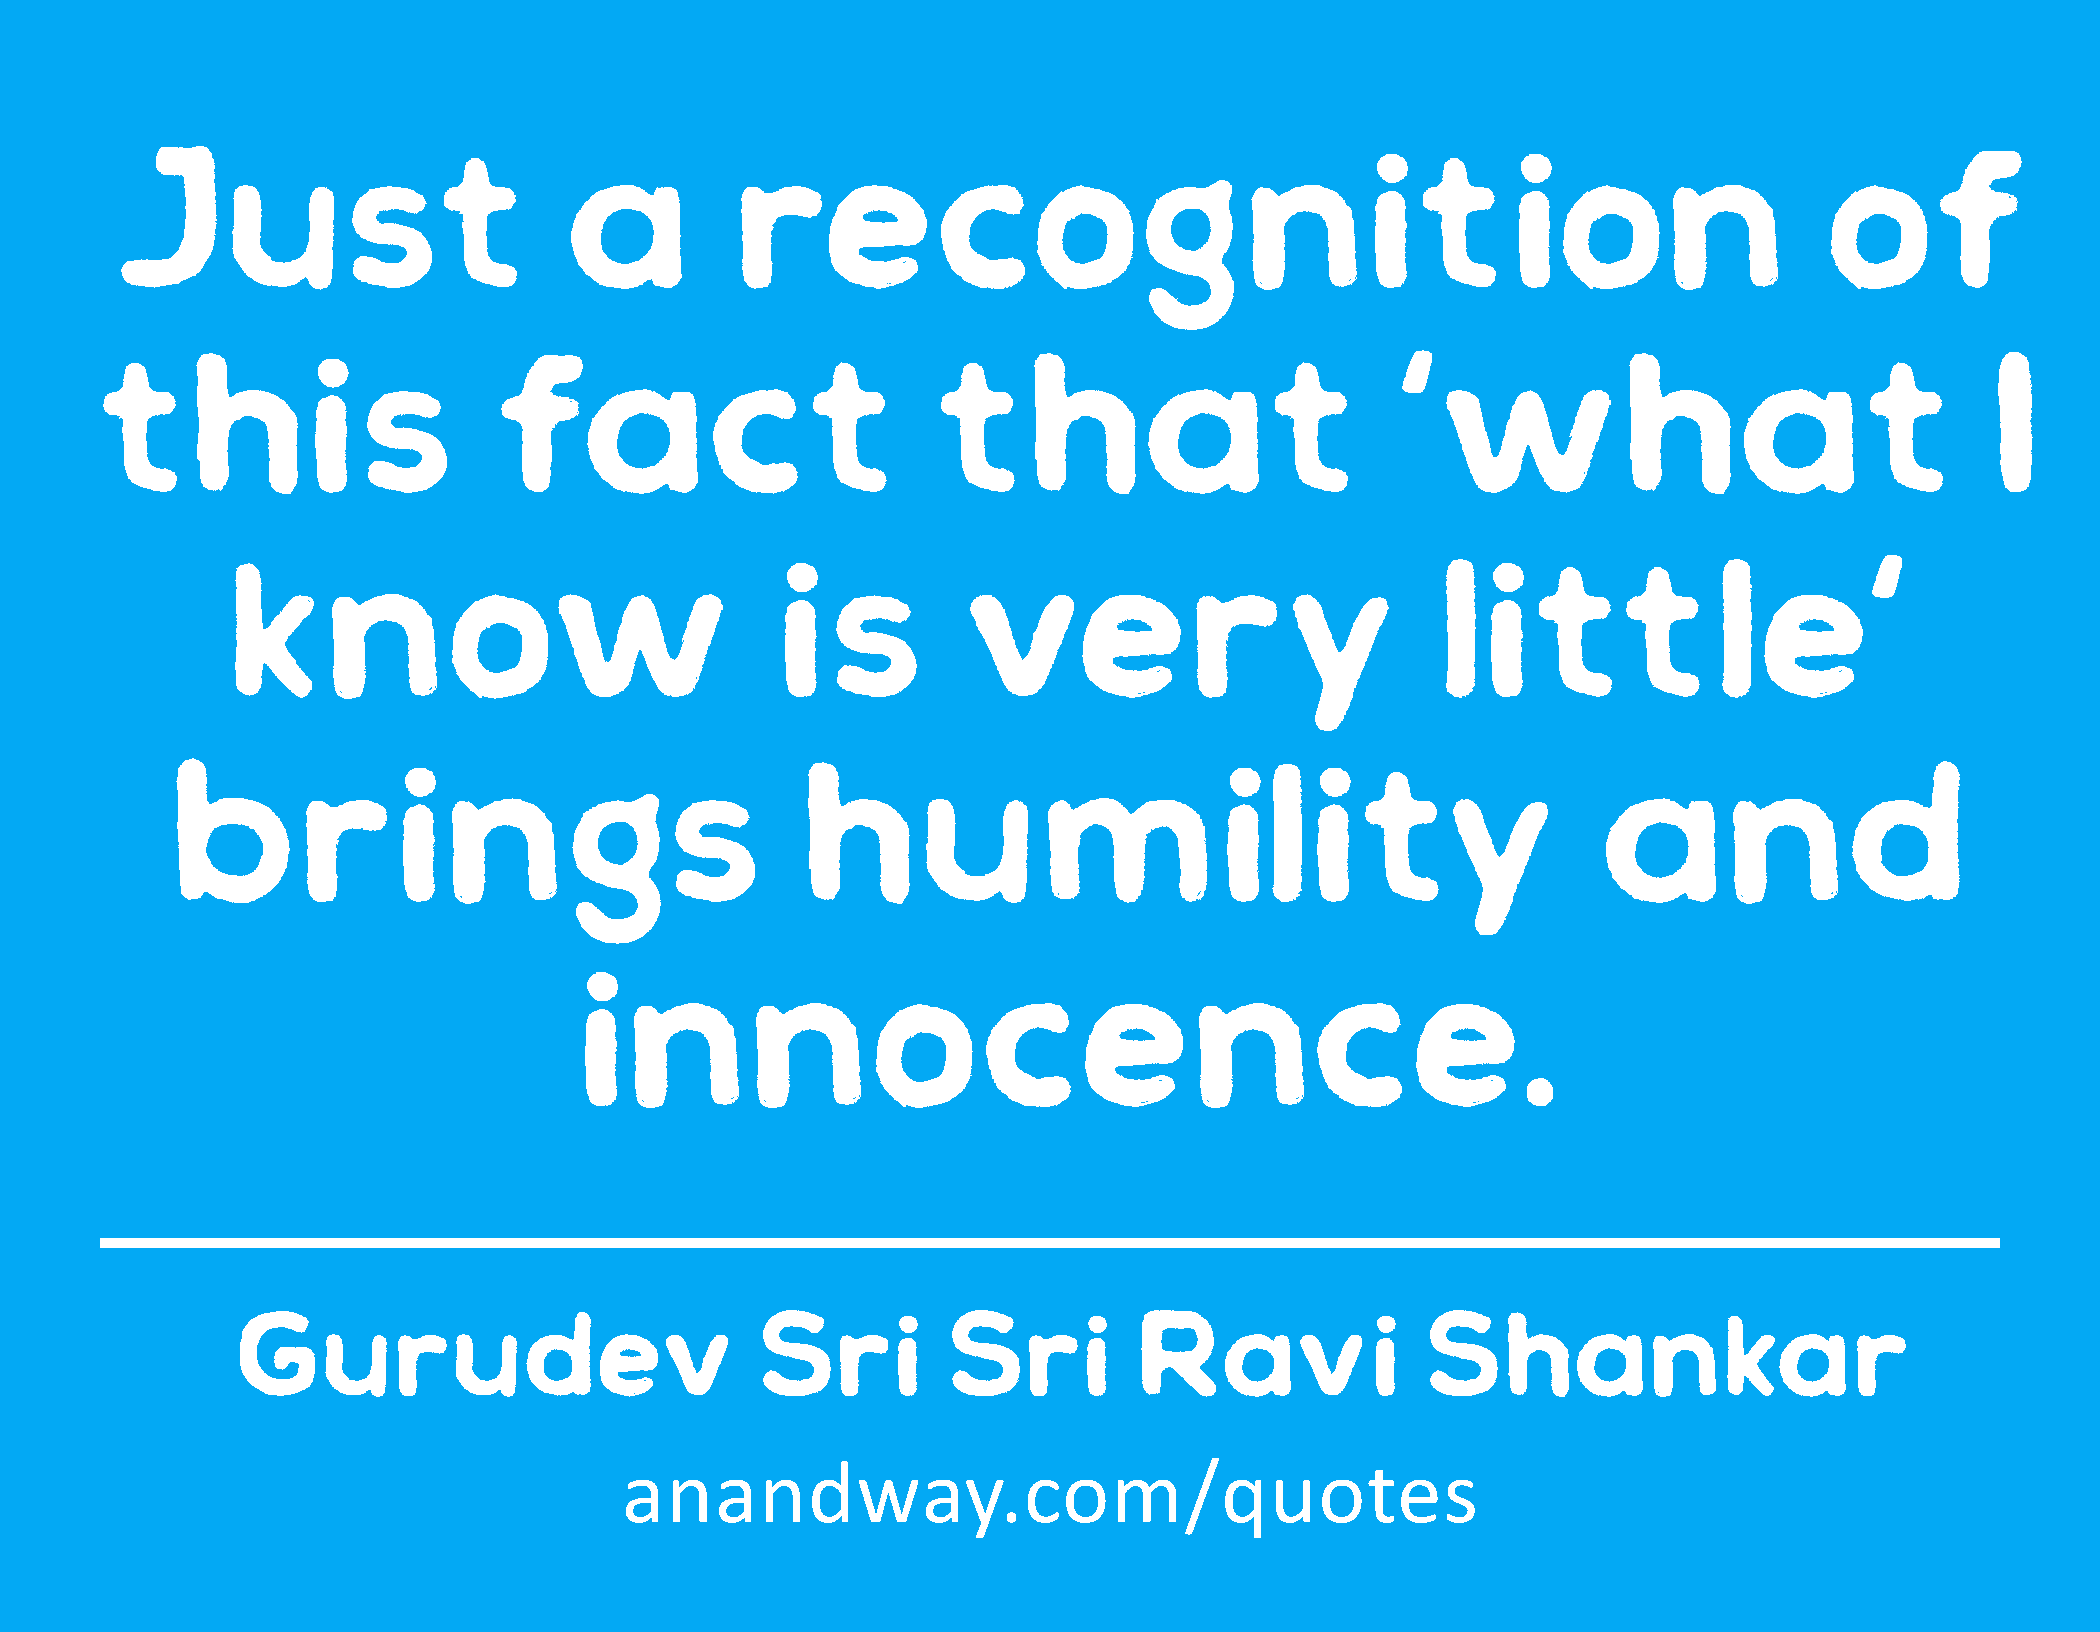 Just a recognition of this fact that 'what I know is very little' brings humility and innocence. 
 -Gurudev Sri Sri Ravi Shankar